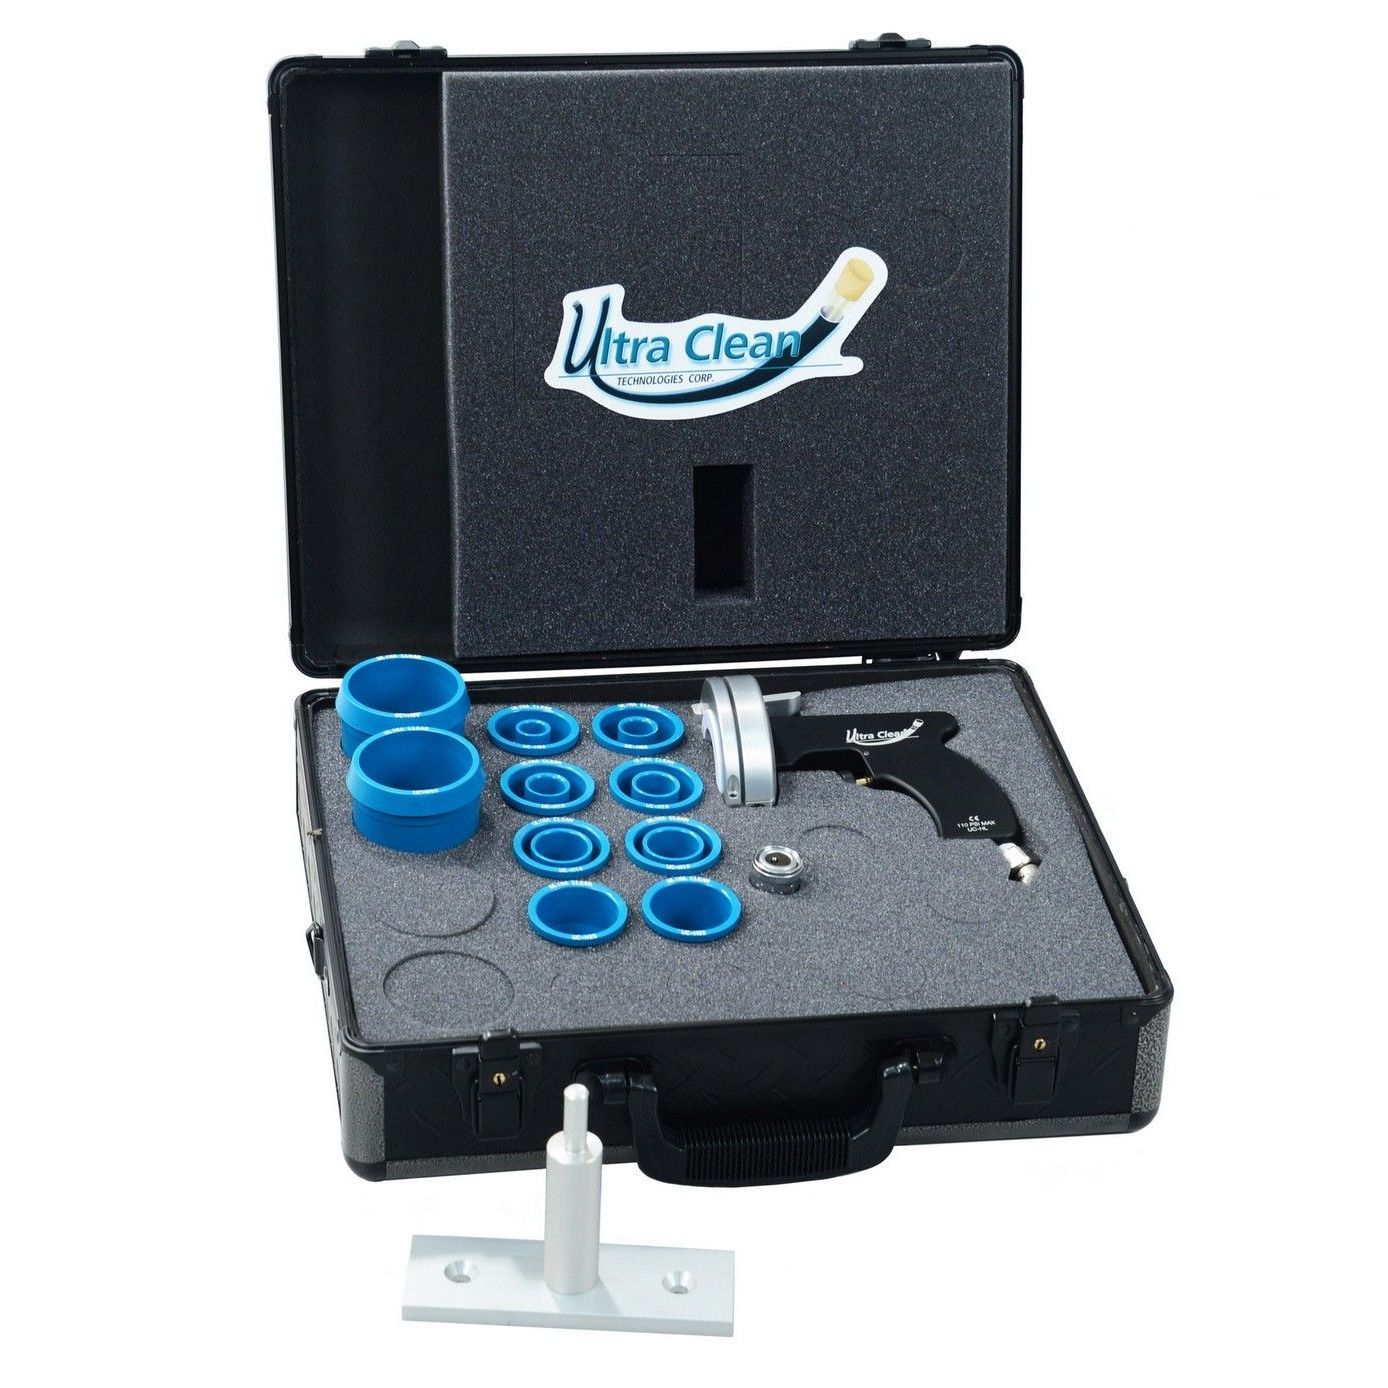 UC-HL-10-2 : Ultra Clean 2 Launcher Kit with 10 Nozzles